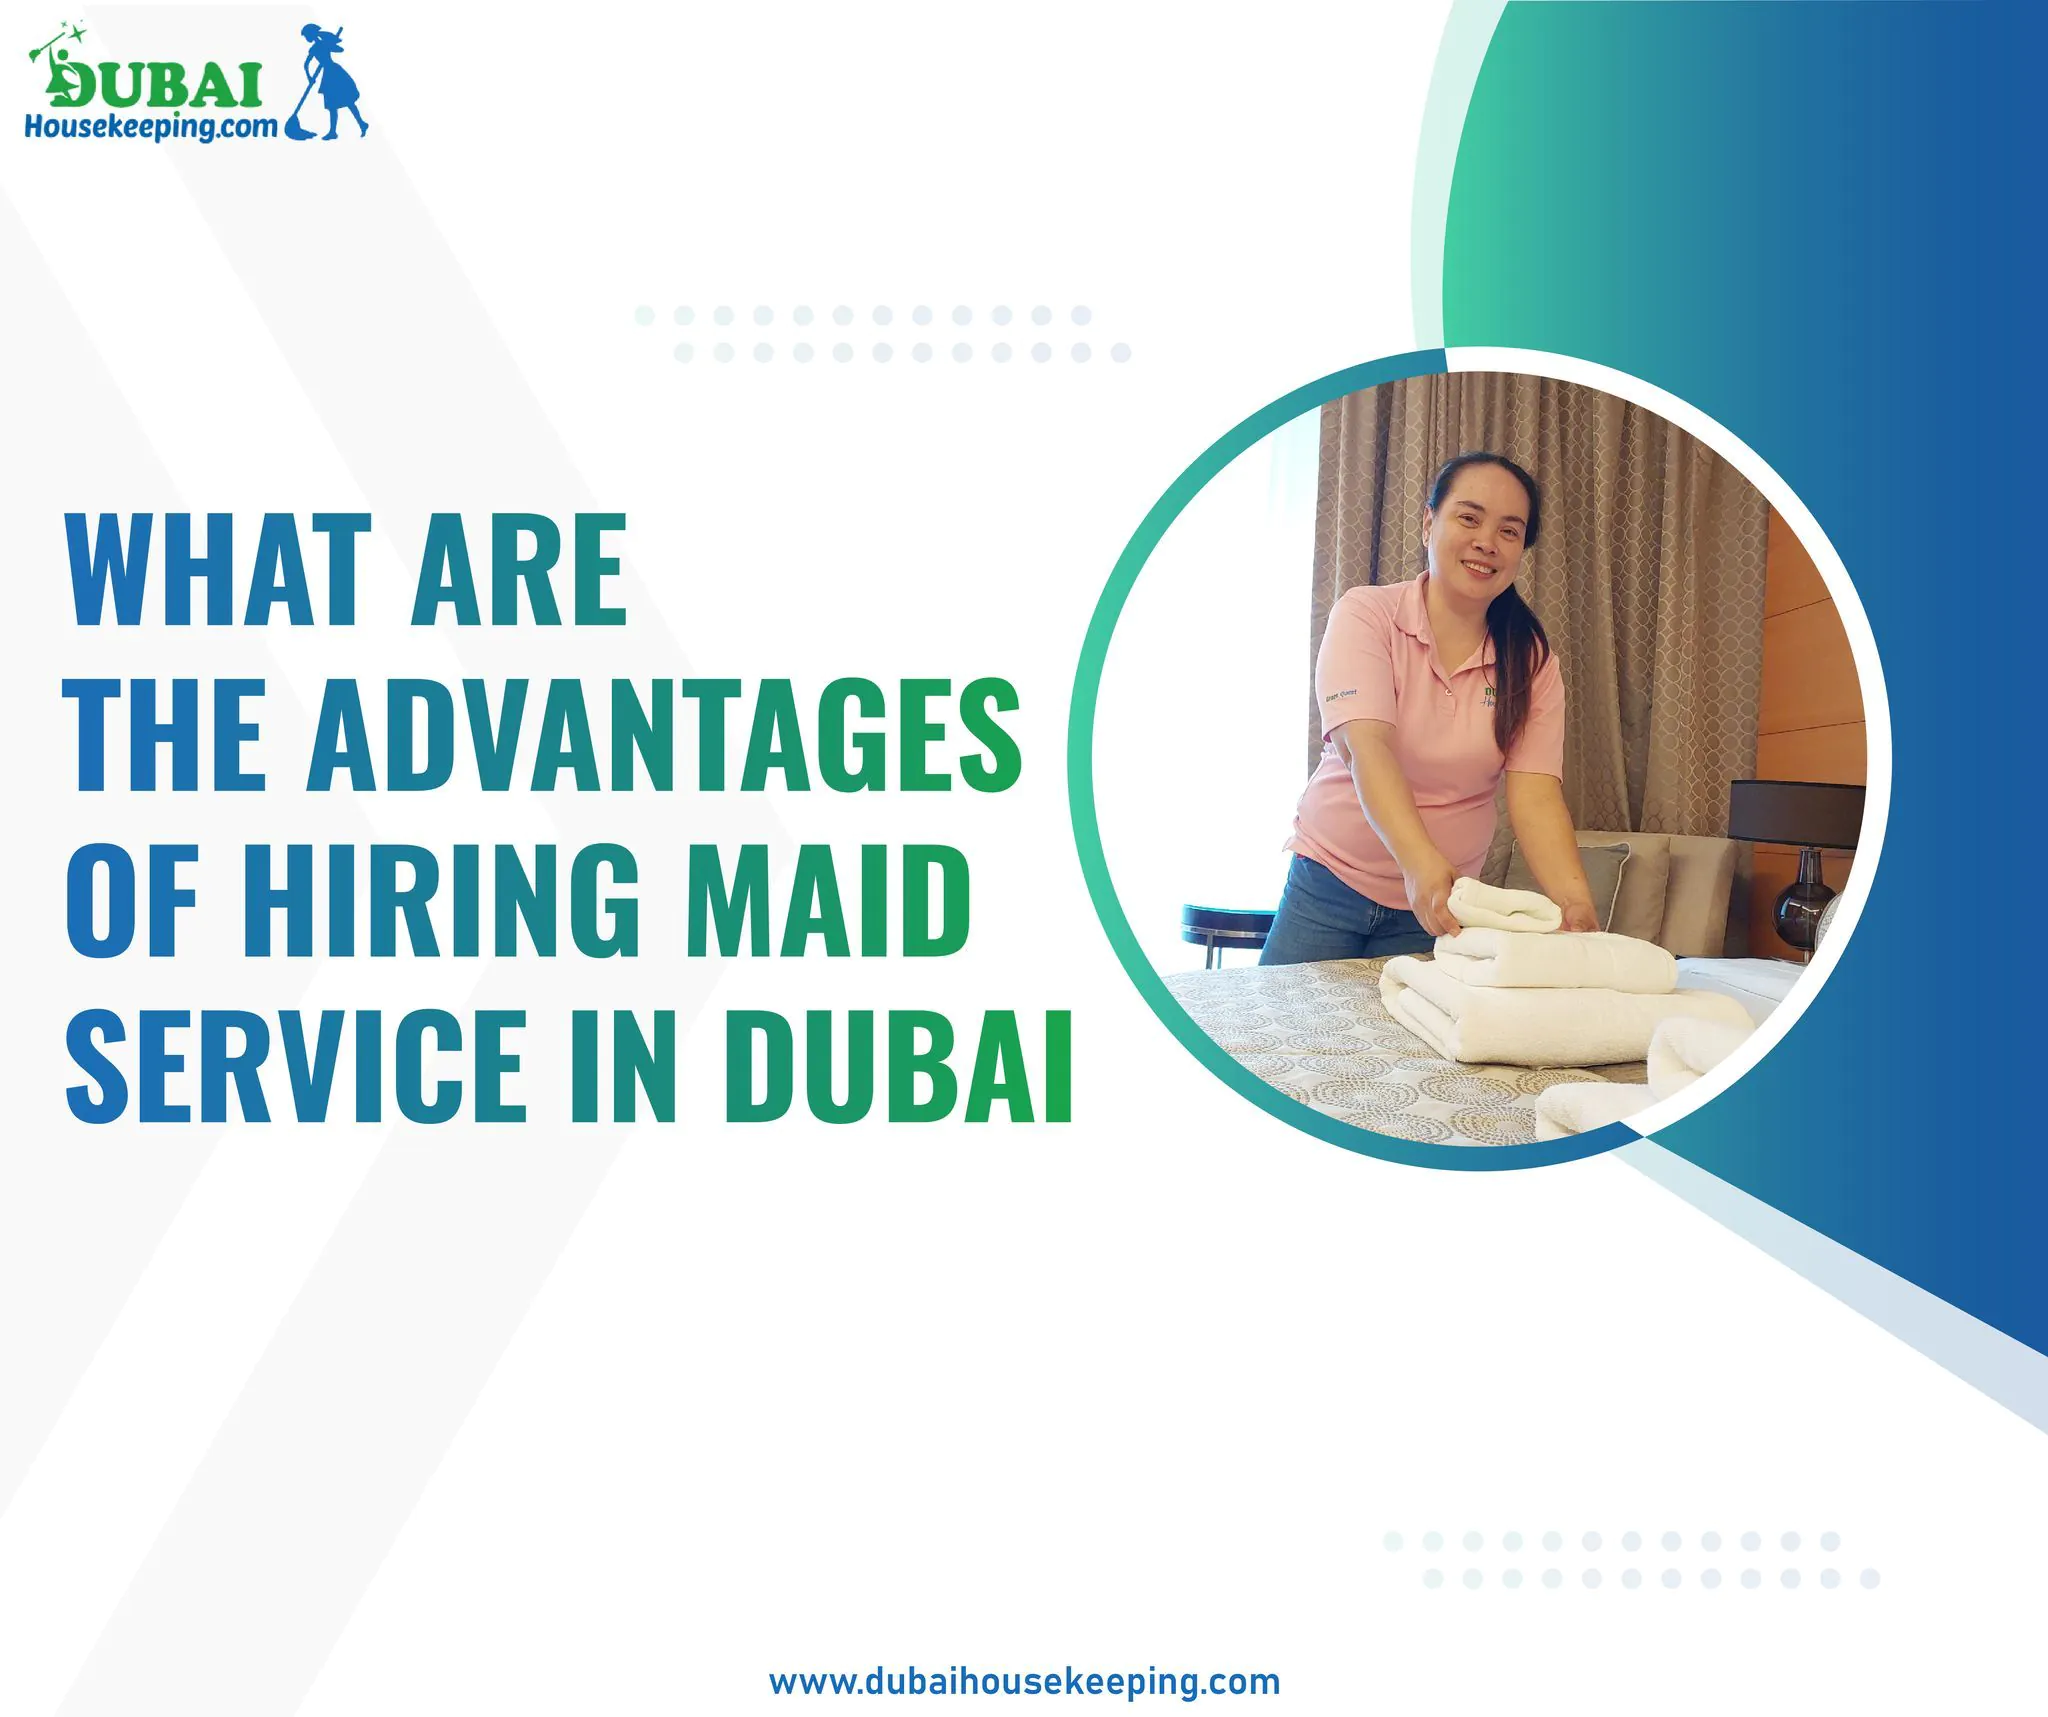 What Are the Advantages of Hiring Maid Service in Dubai